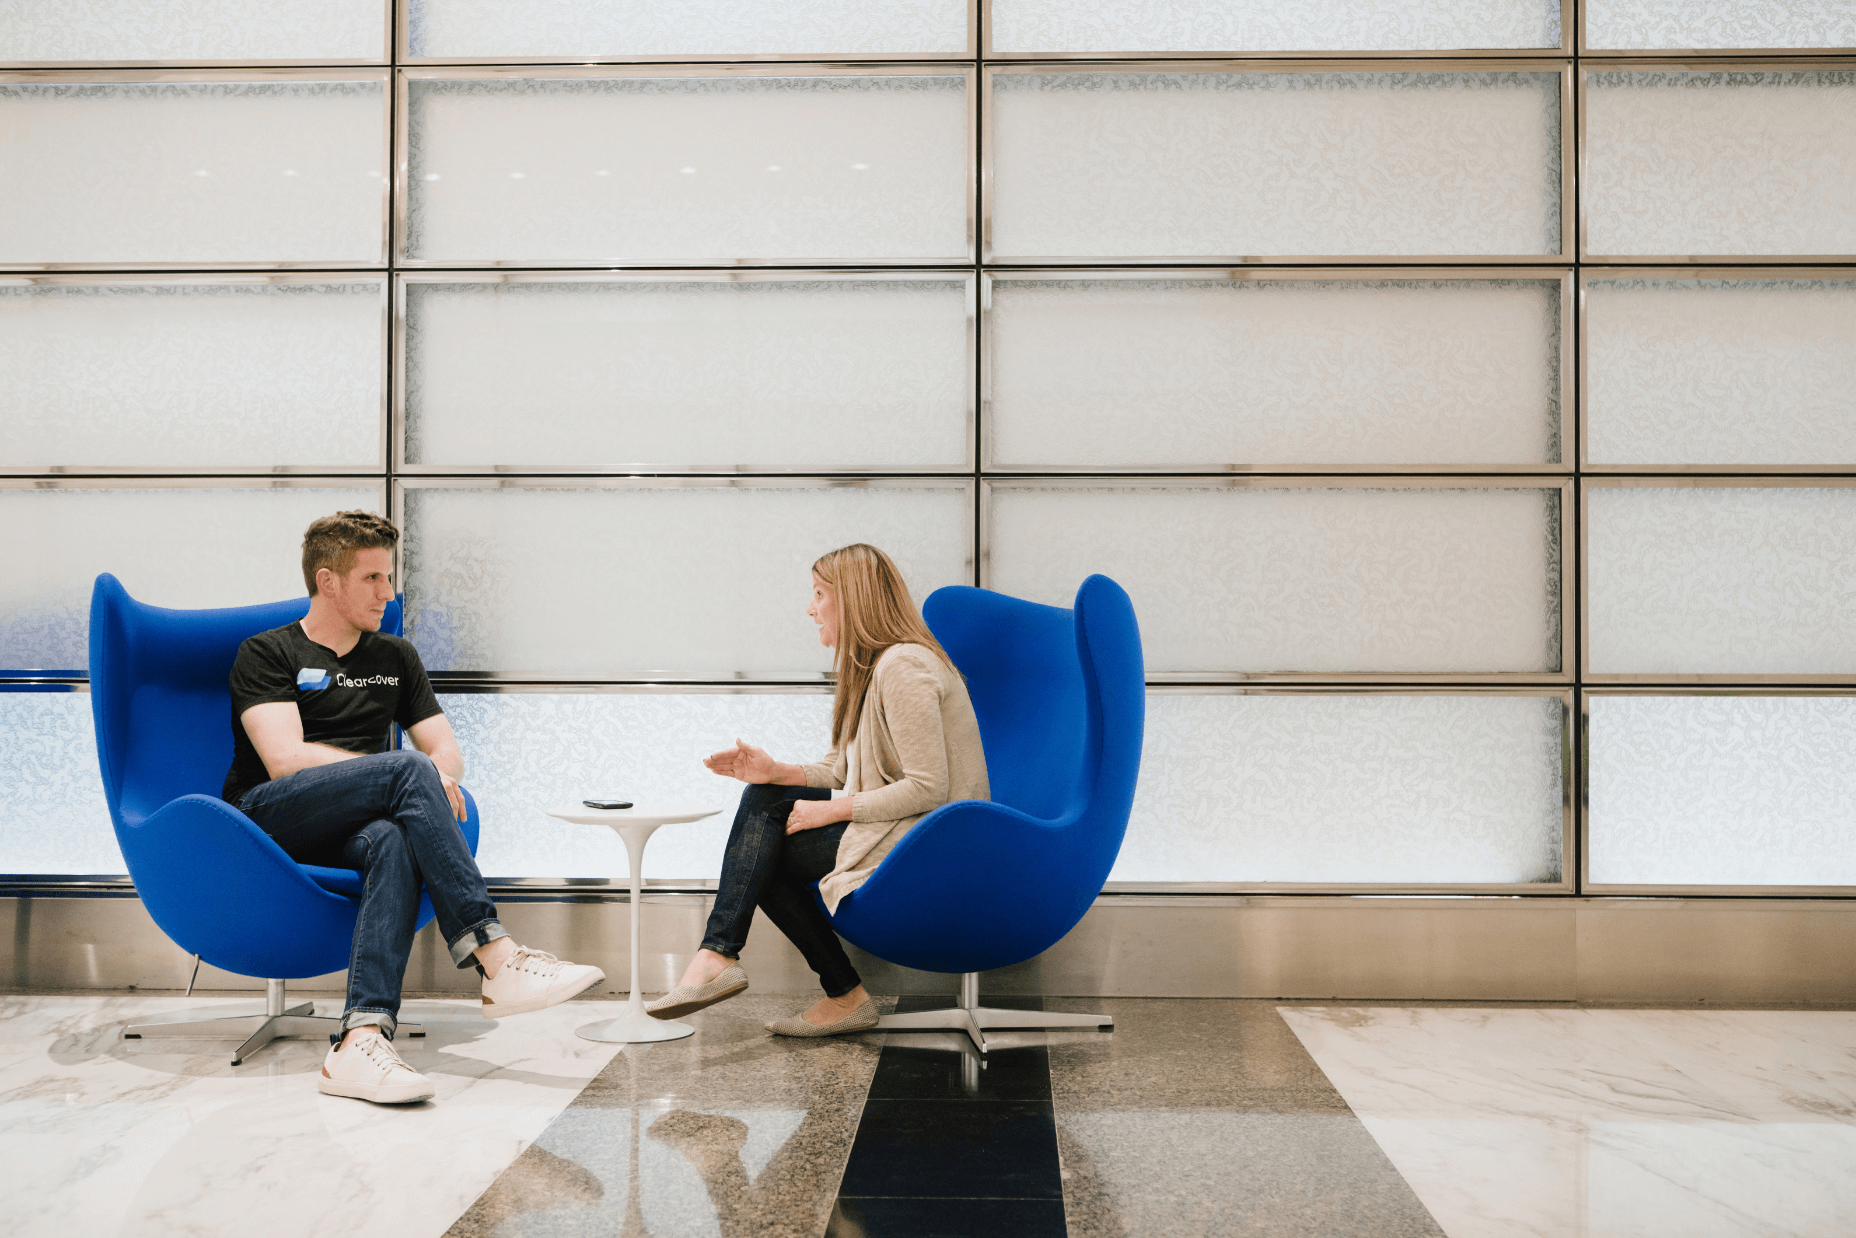 Questions to Ask in an Interview to Discover Company Culture